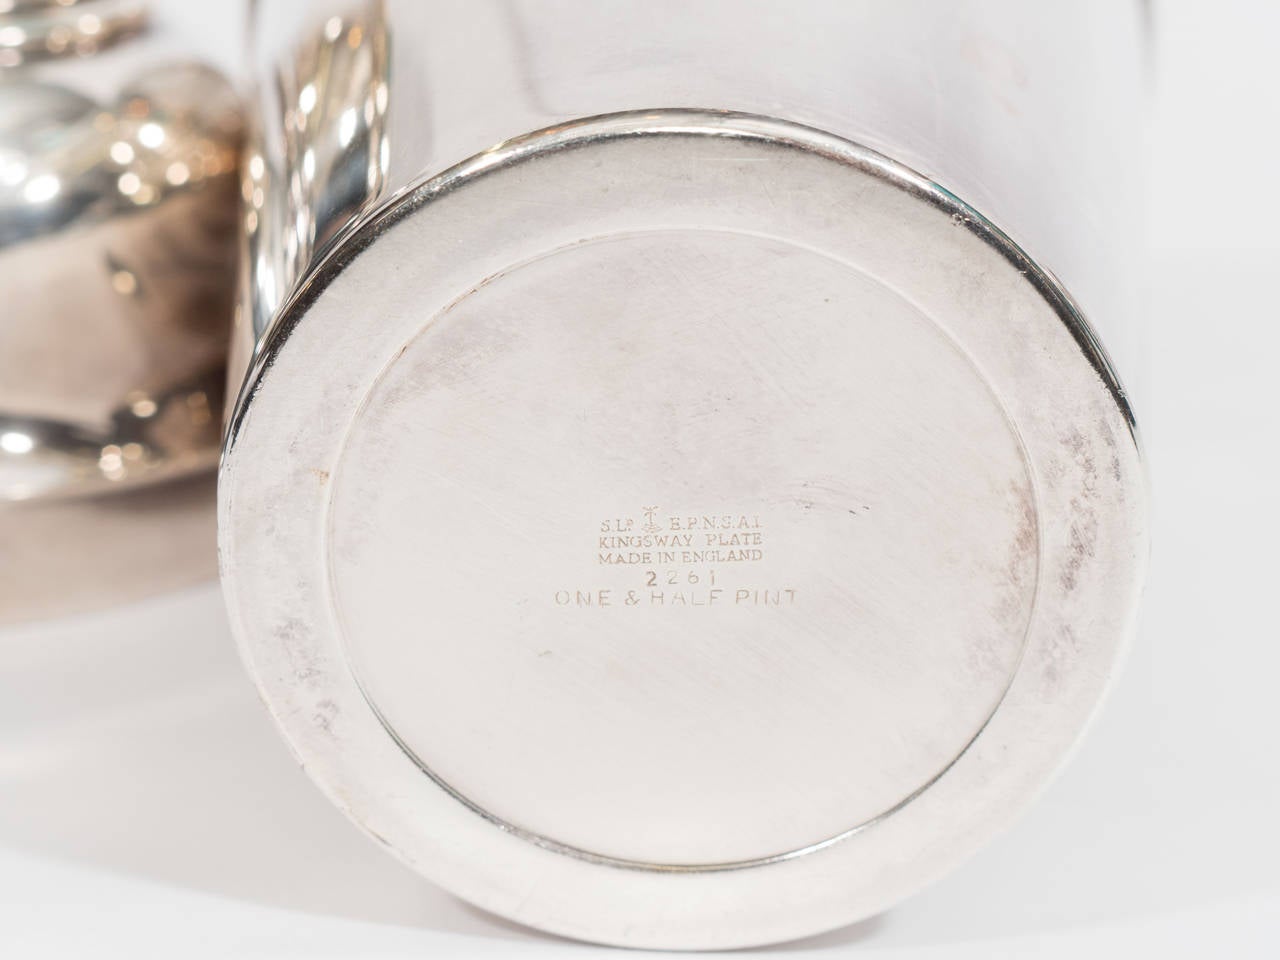 A vintage English silver plate cocktail shaker with lemon squeezer. Marked Kingsway plate; one and a half pint shaker.

Good vintage condition with age appropriate wear.